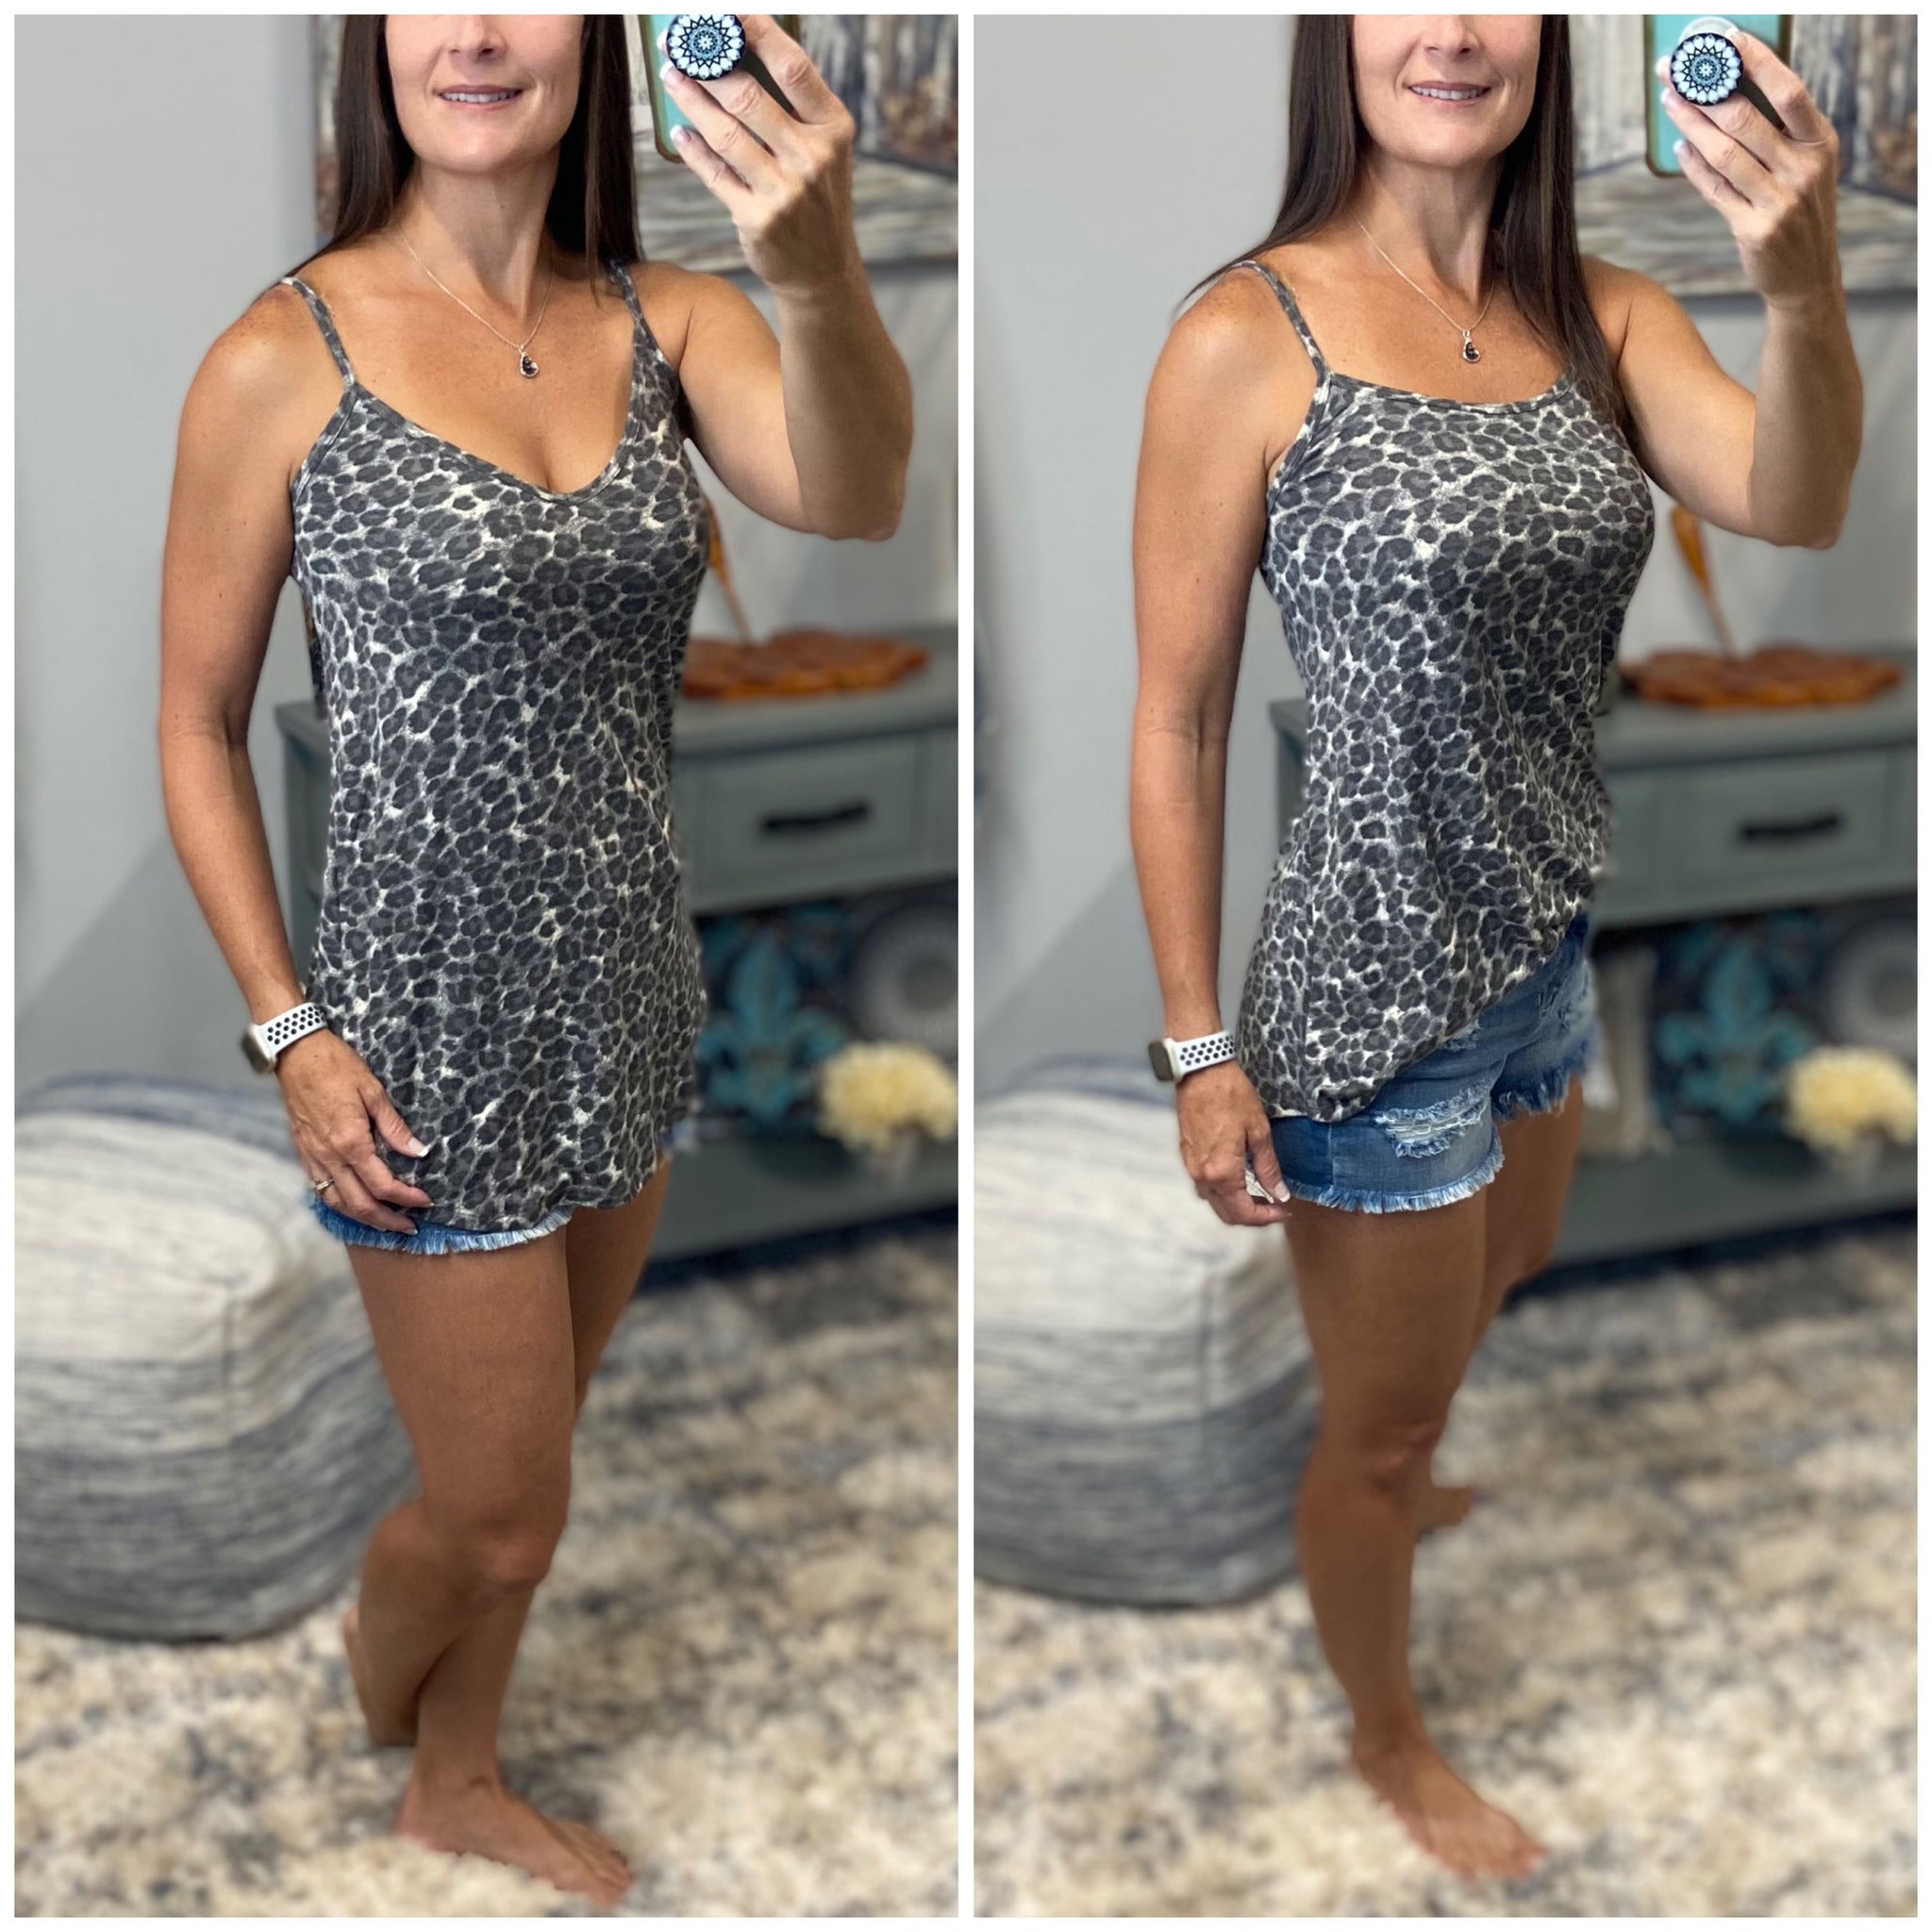 “Heat Wave” Reversible Leopard Low Scoop Or V-Neck Tank Shirt Top Distressed Gray